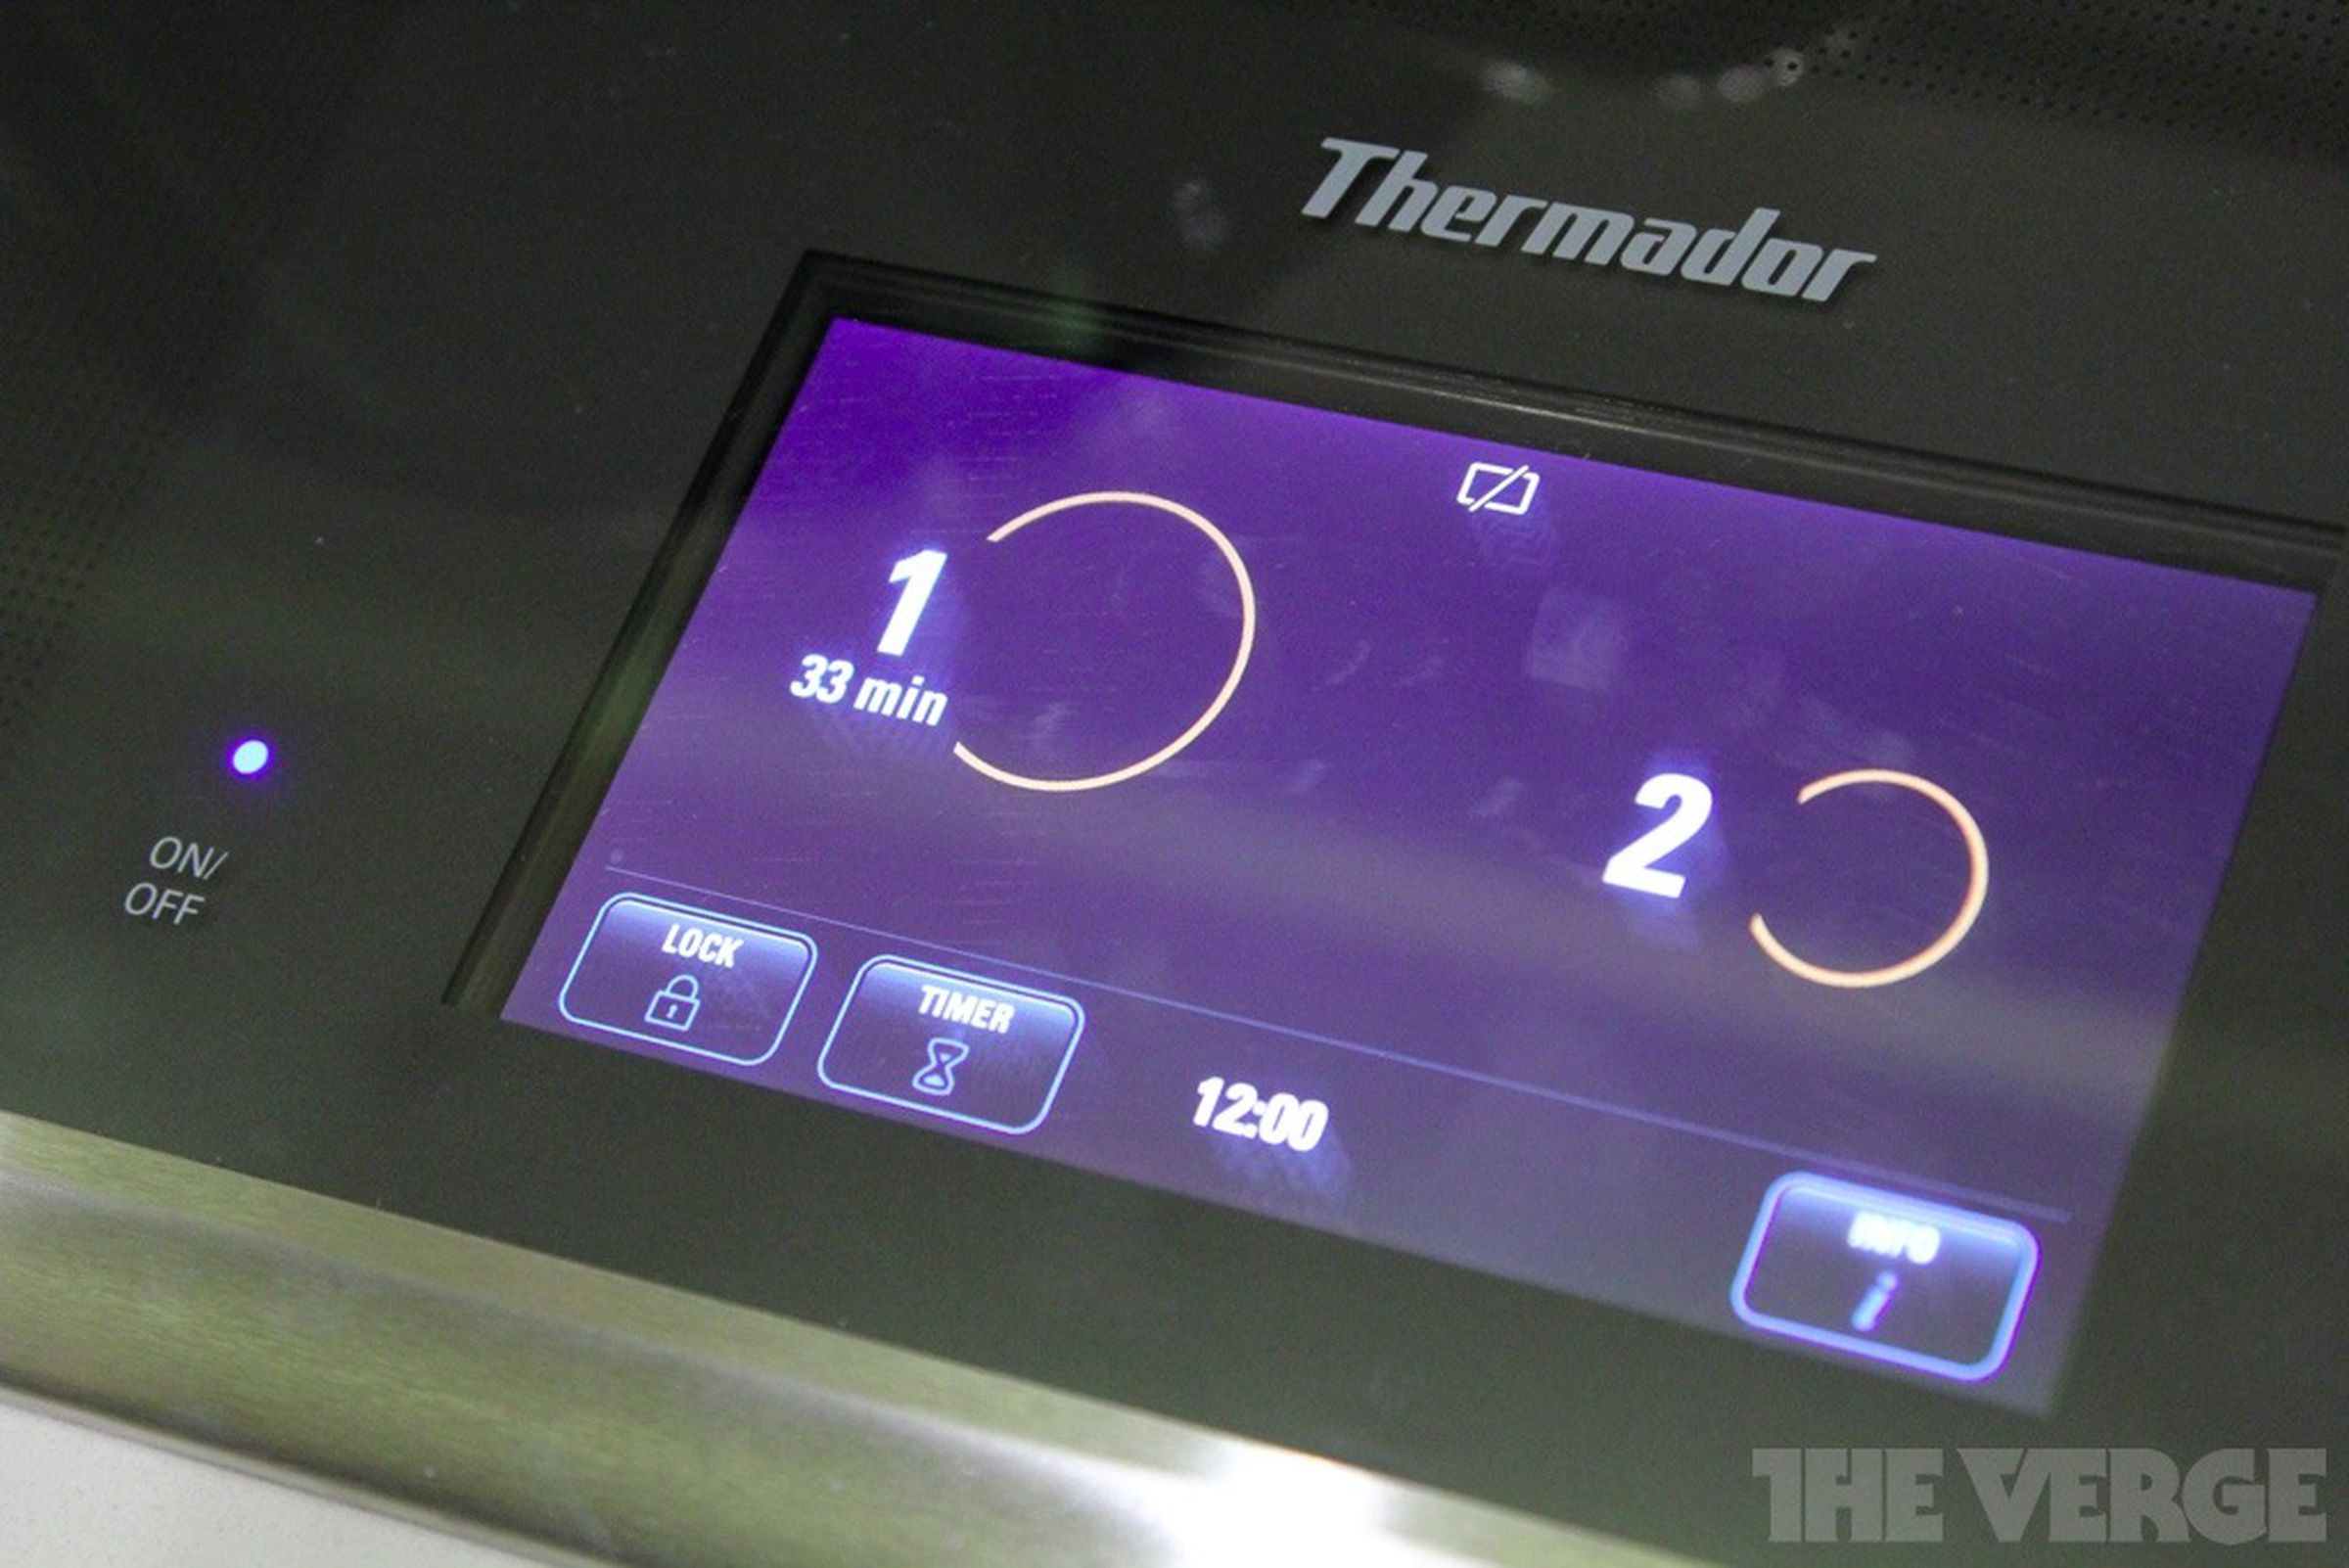 Thermador Freedom auto-sensing induction cooktop hands-on pictures